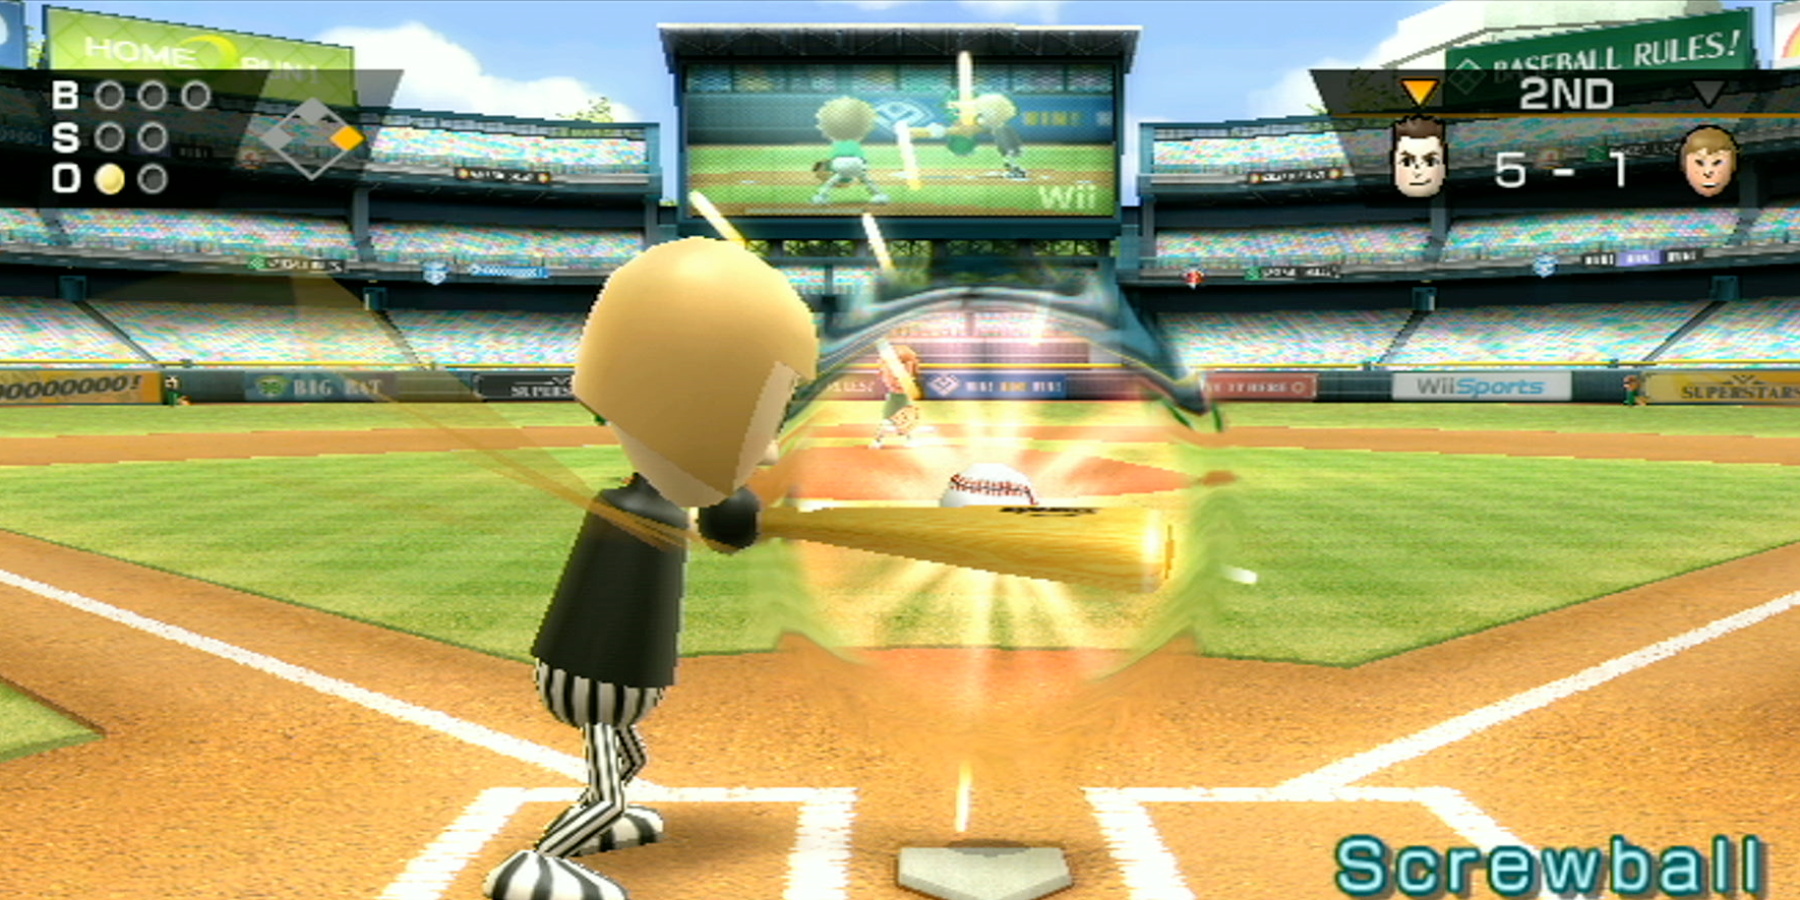 Baseball being played in Wii Sports